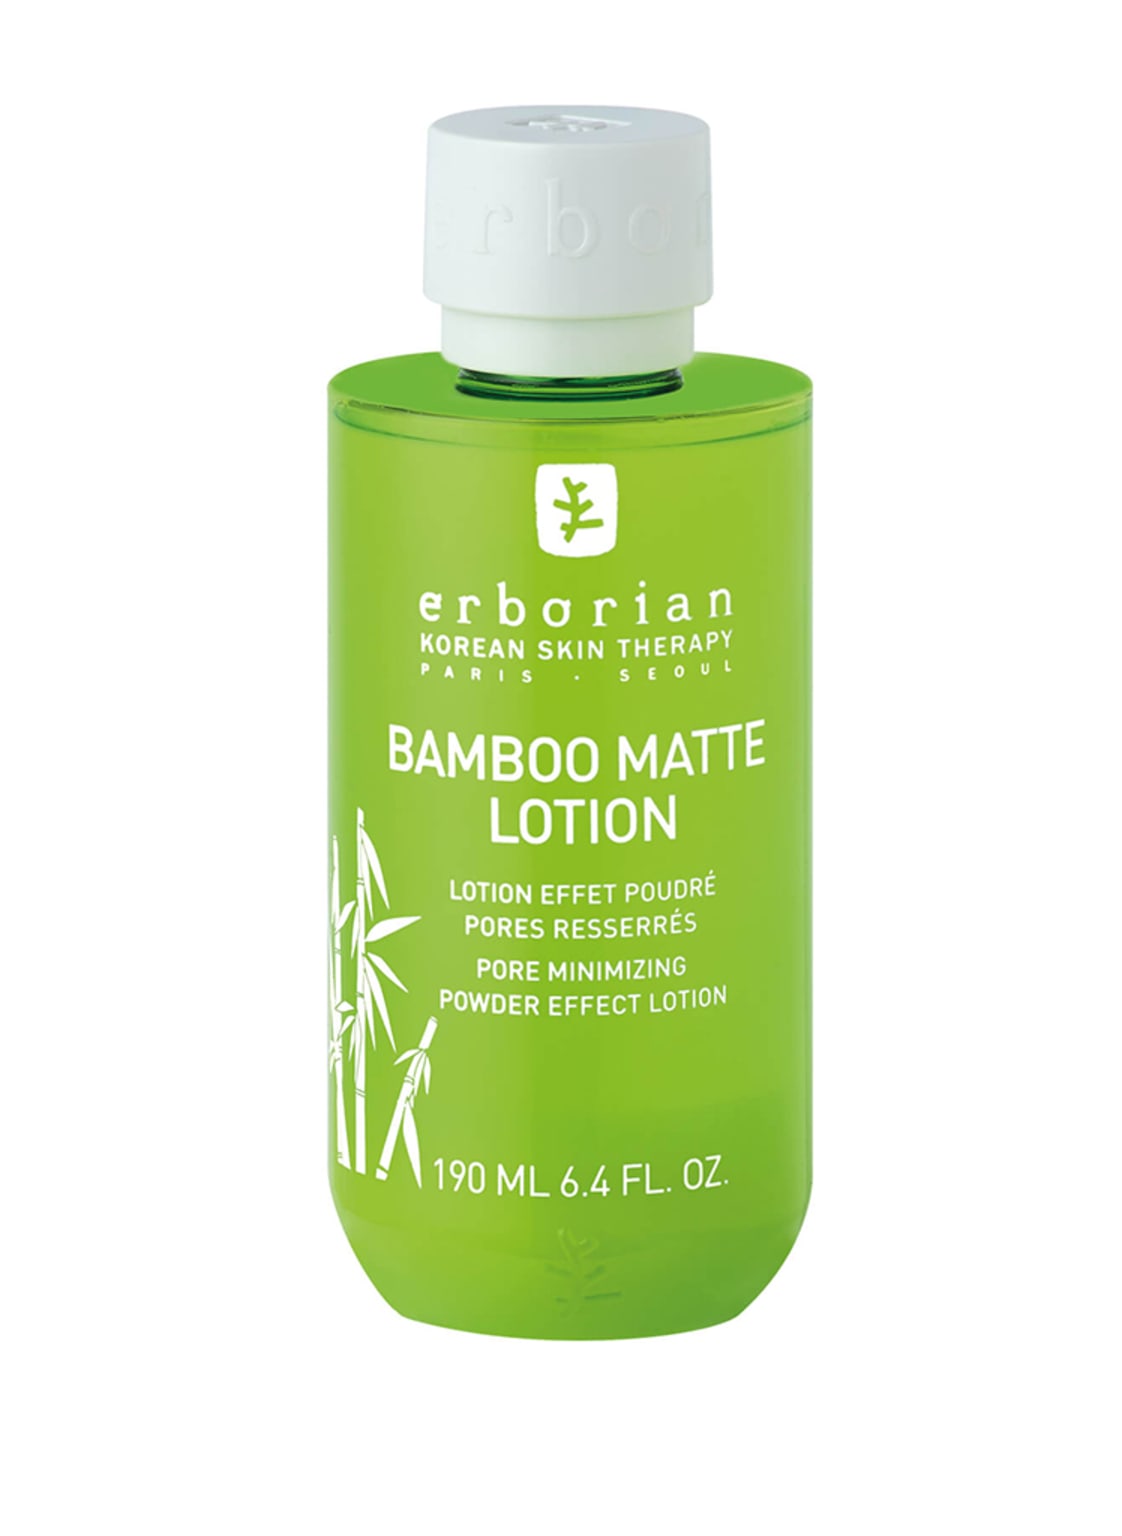 Image of Erborian Bamboo Matte Lotion Gesichtslotion 190 ml